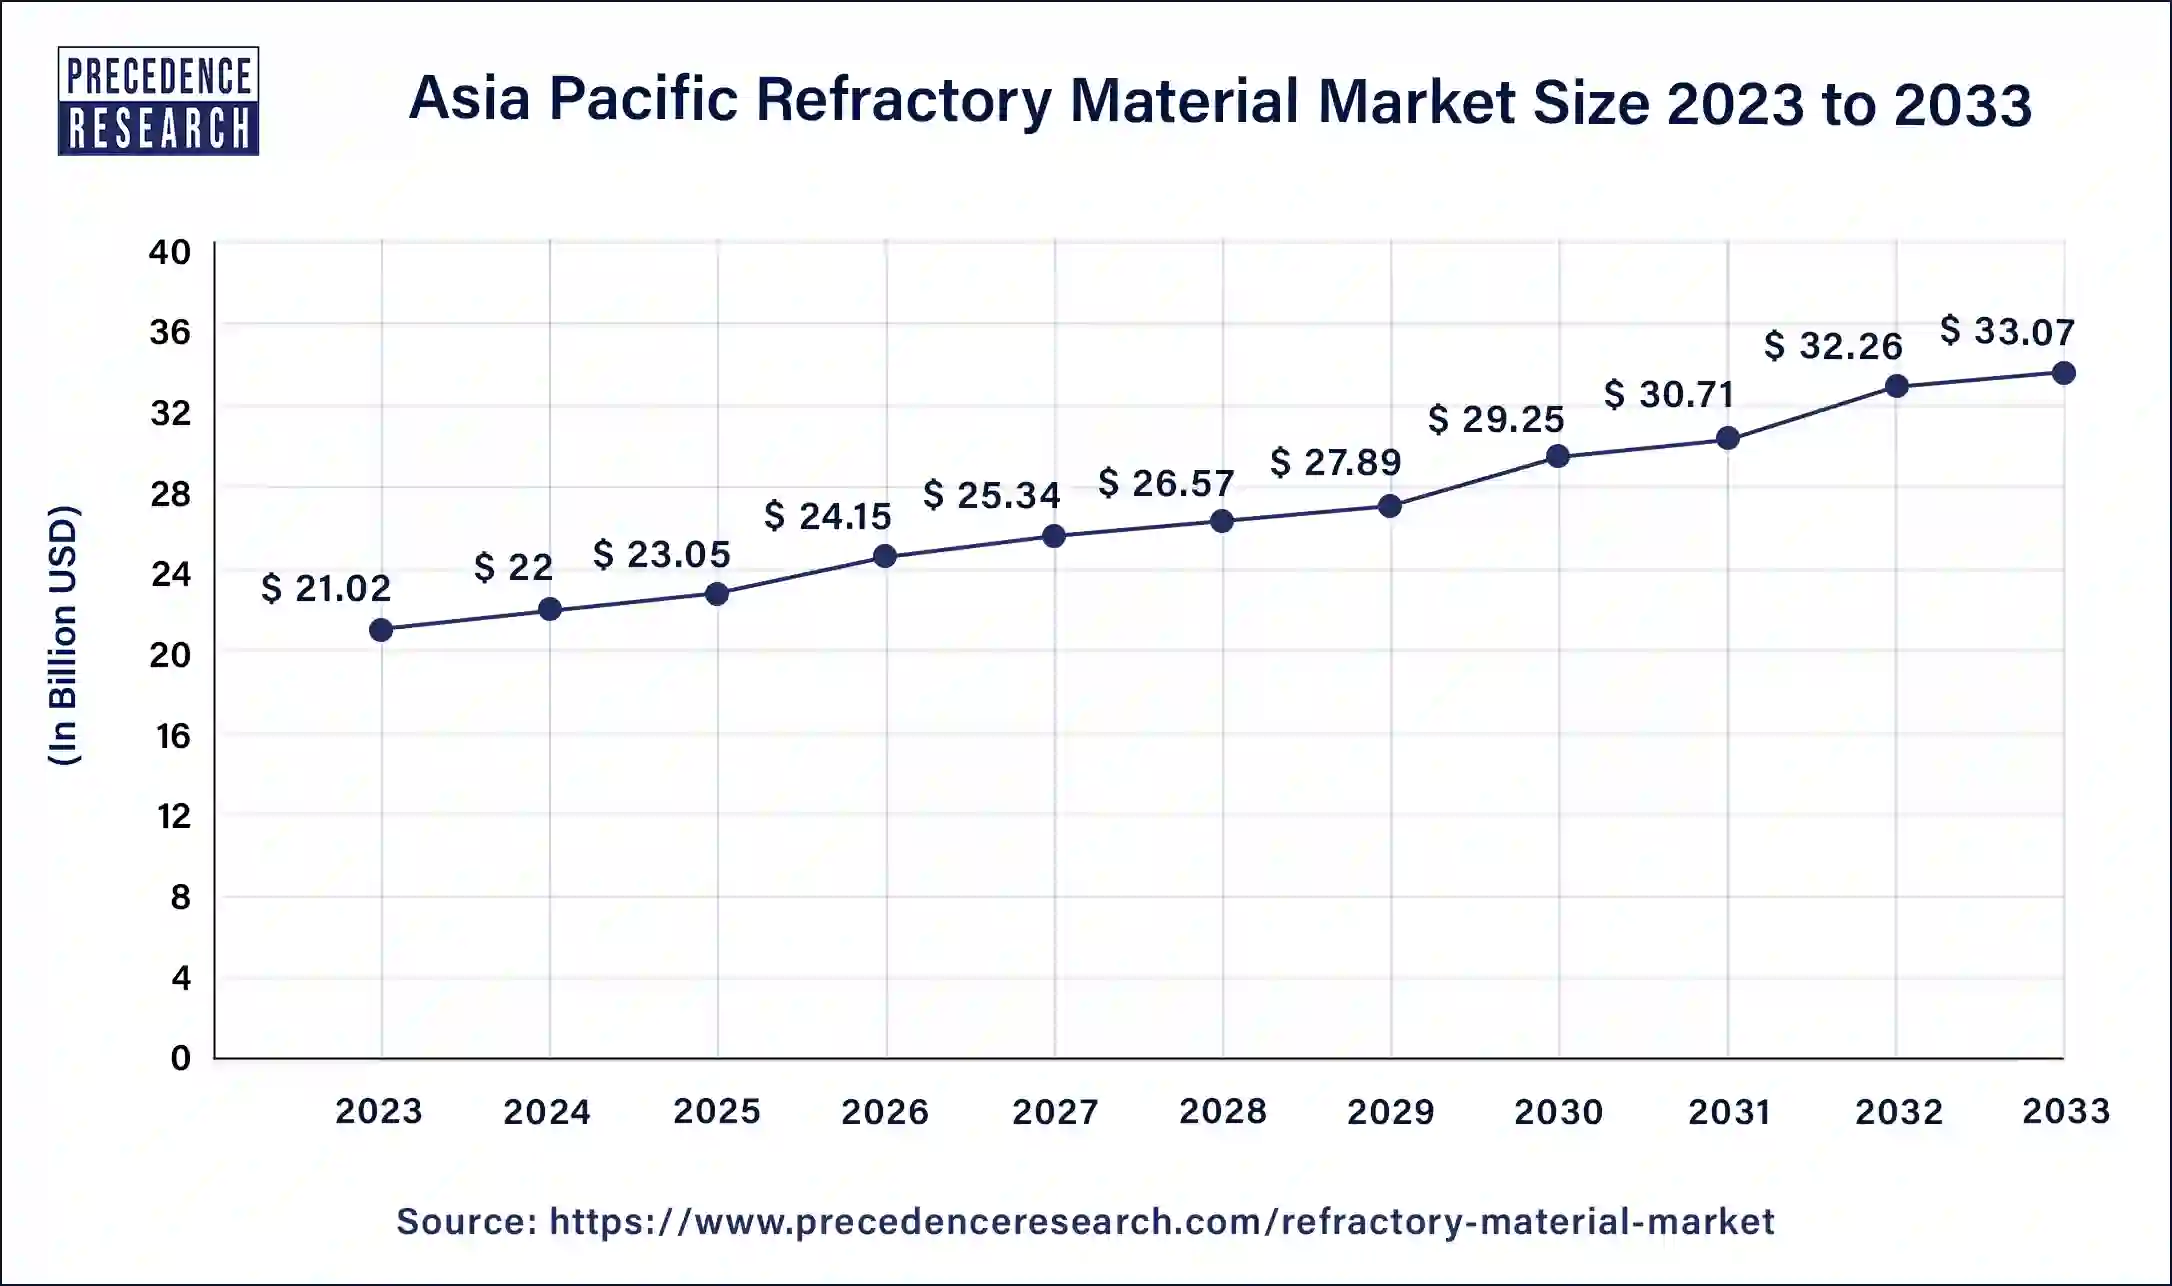 Asia Pacific Refractory Material Market Size 2024 to 2033